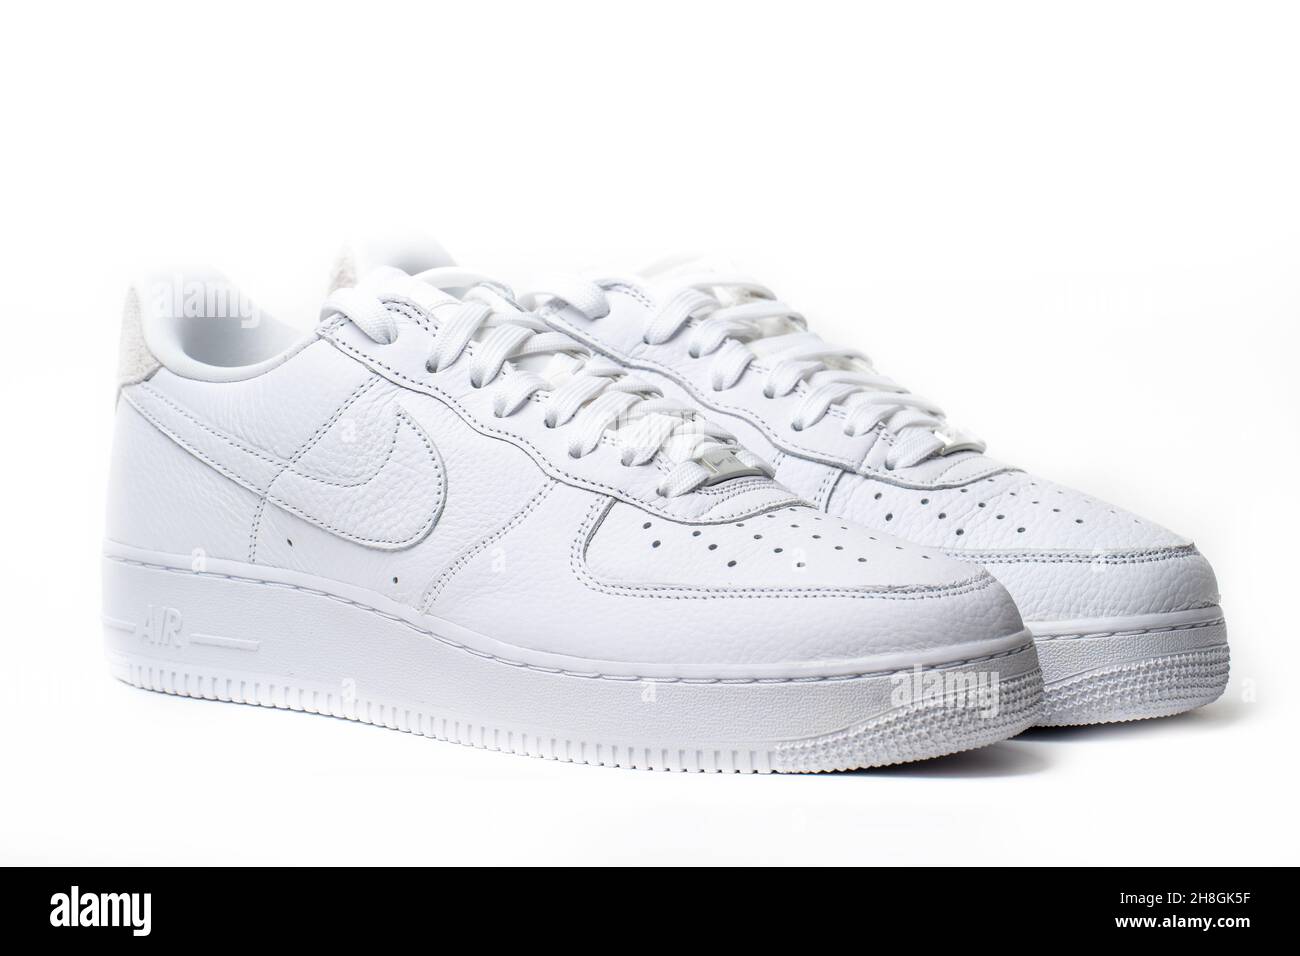 nike air force 1 technology